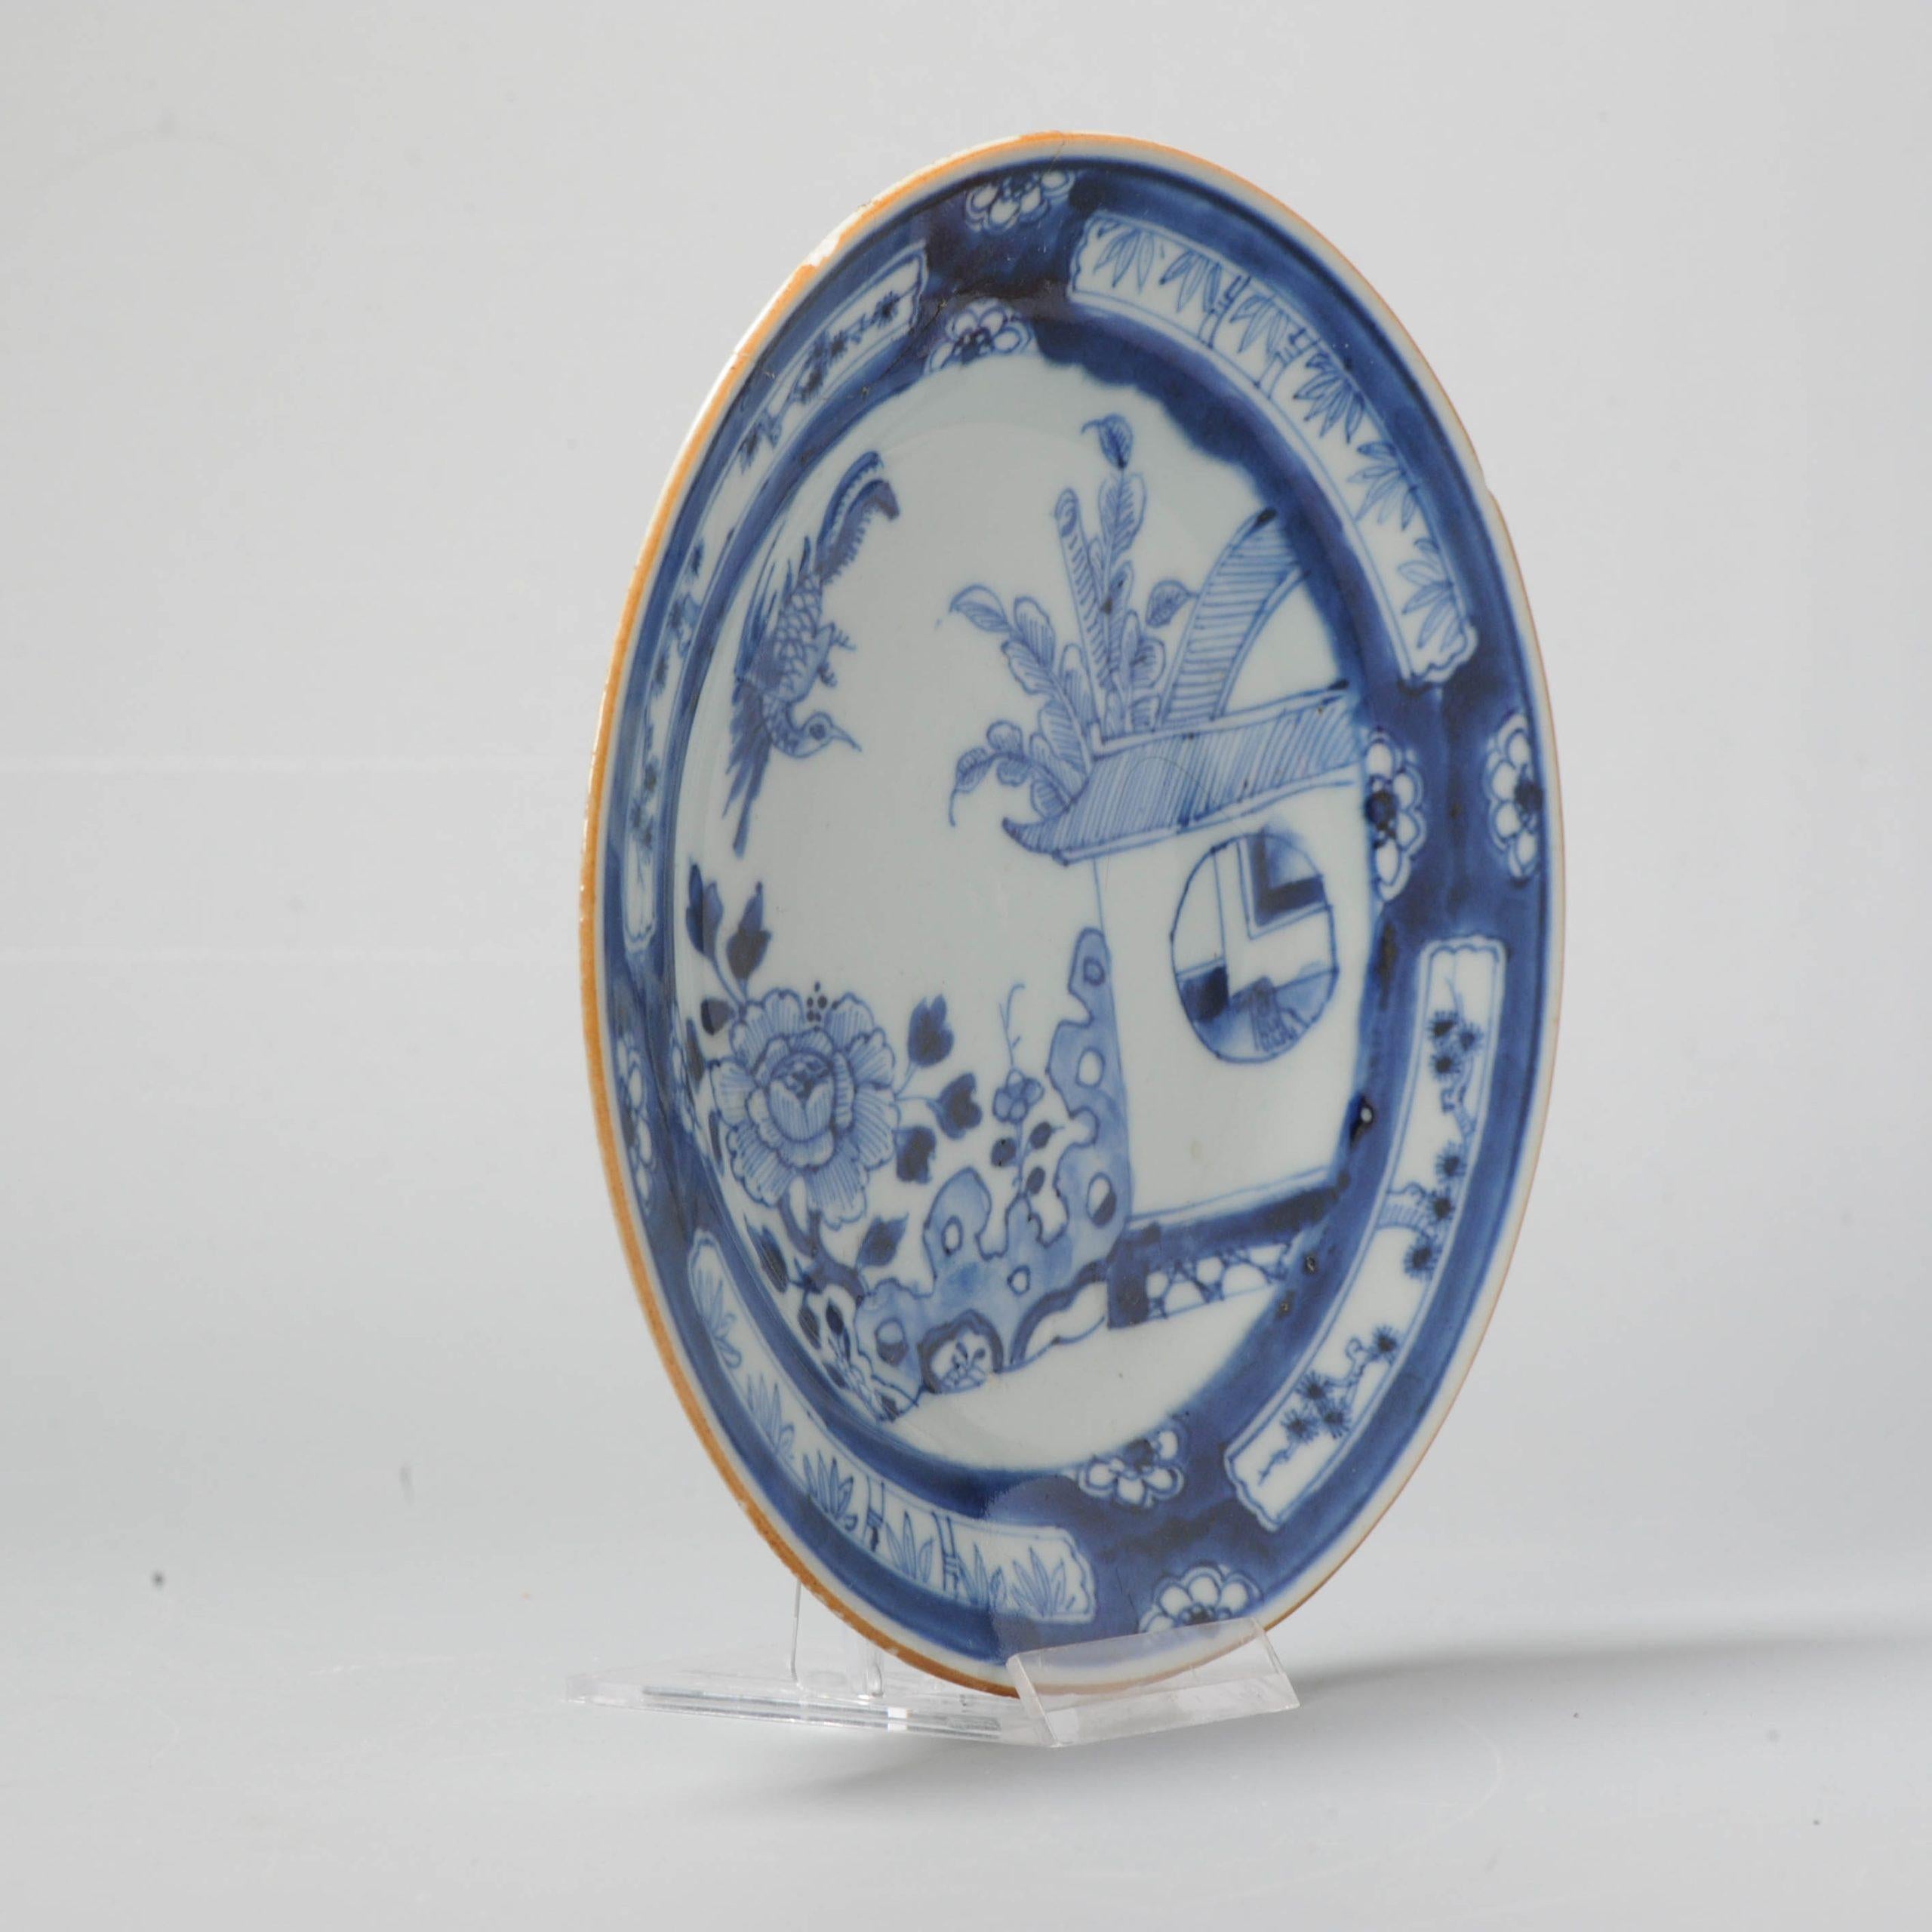 A very nice plate from the 18th century with the well know scene of 'Cuckoo in the house'.

Additional information:
Material: Porcelain & Pottery
Region of Origin: China
Period: 18th century, 19th century Qing (1661 - 1912)
Original/Reproduction: